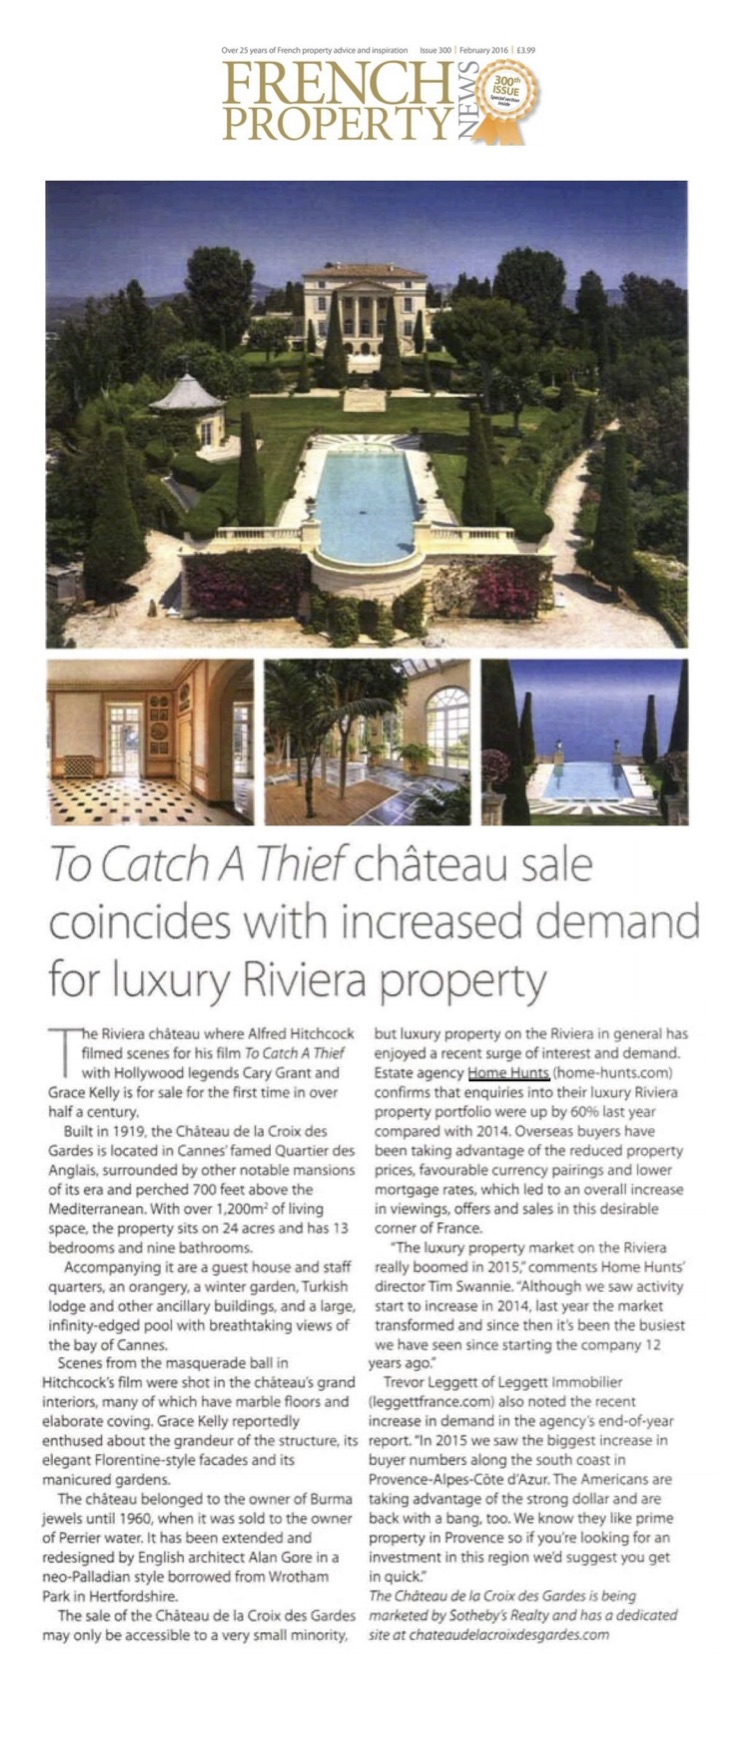 French Property News – Increased demand for luxury Riviera property